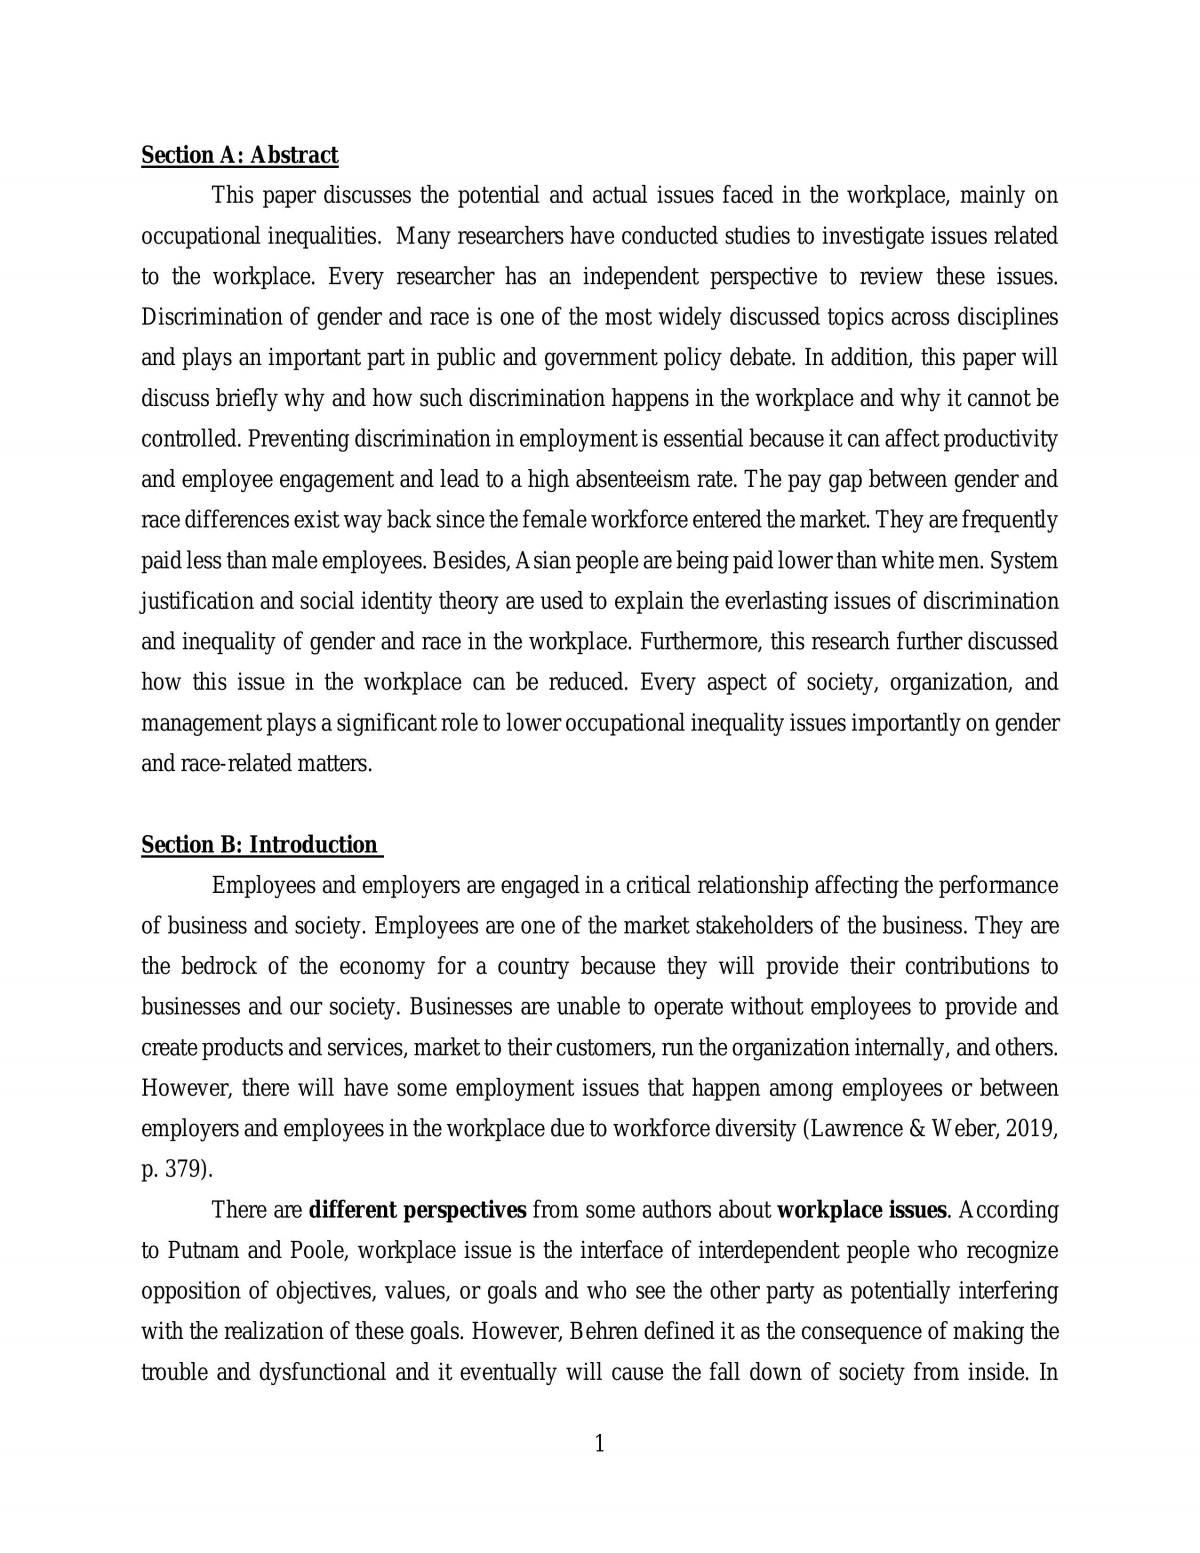 workplace issue example essay